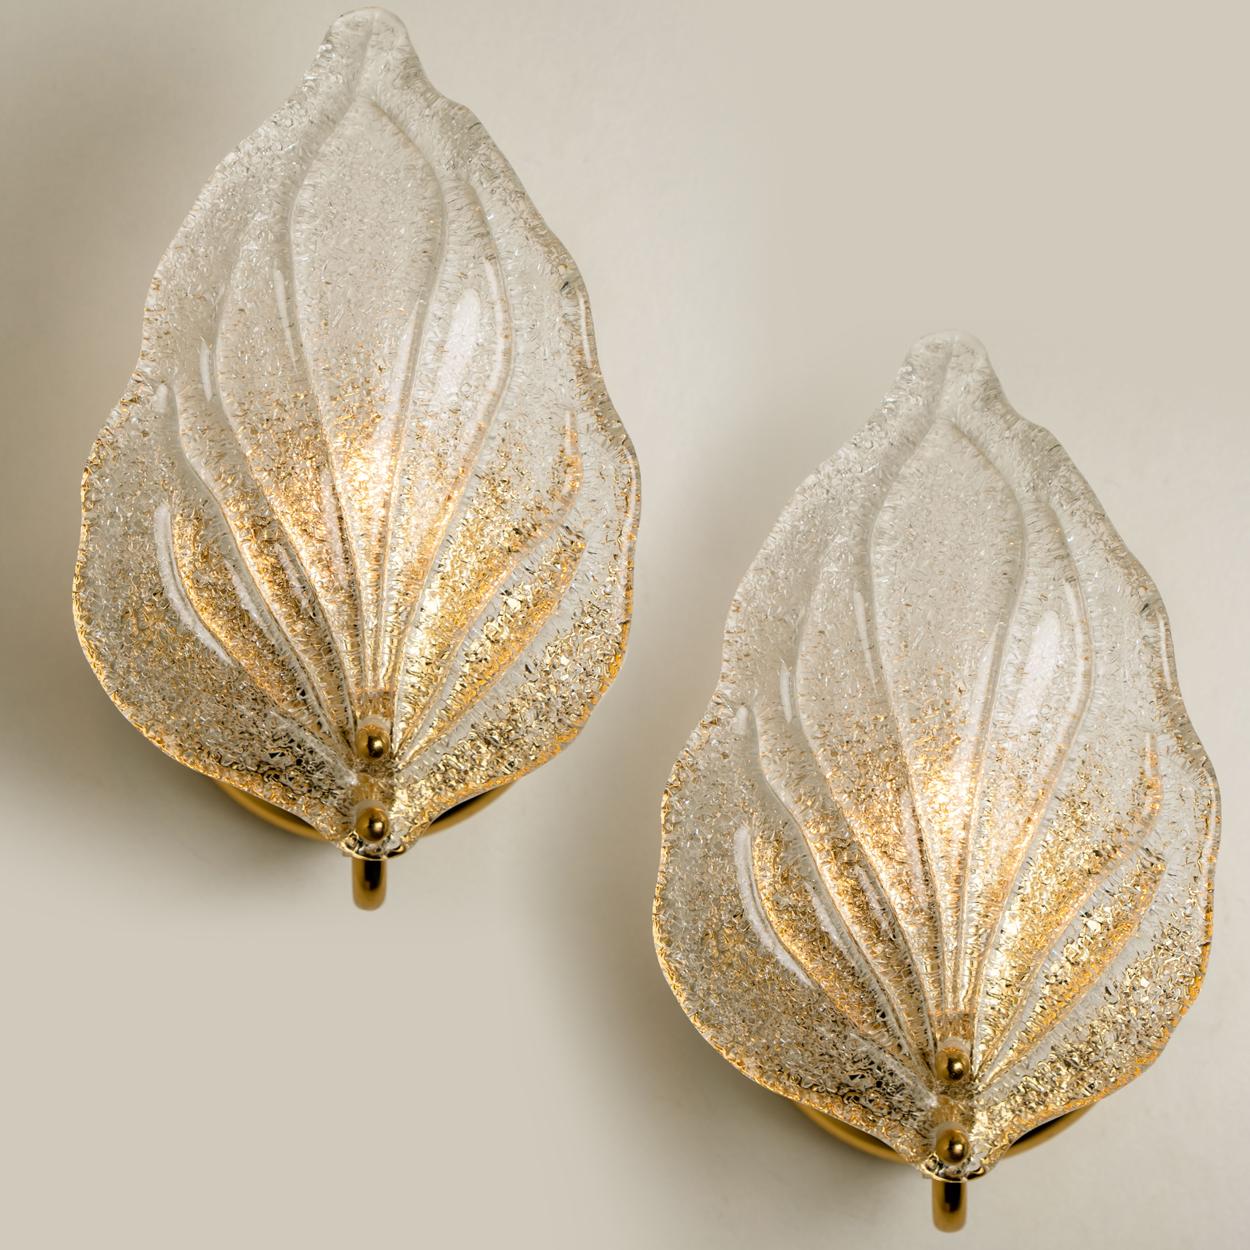 Pair of elegant and exquisite hand blown Murano glass Barovier & Toso wall sconces. Each light fixture consists of one blown Murano glass leaf. Mounted on an brass frame. The leaves refract the light beautifully. The flush mount fills the room with